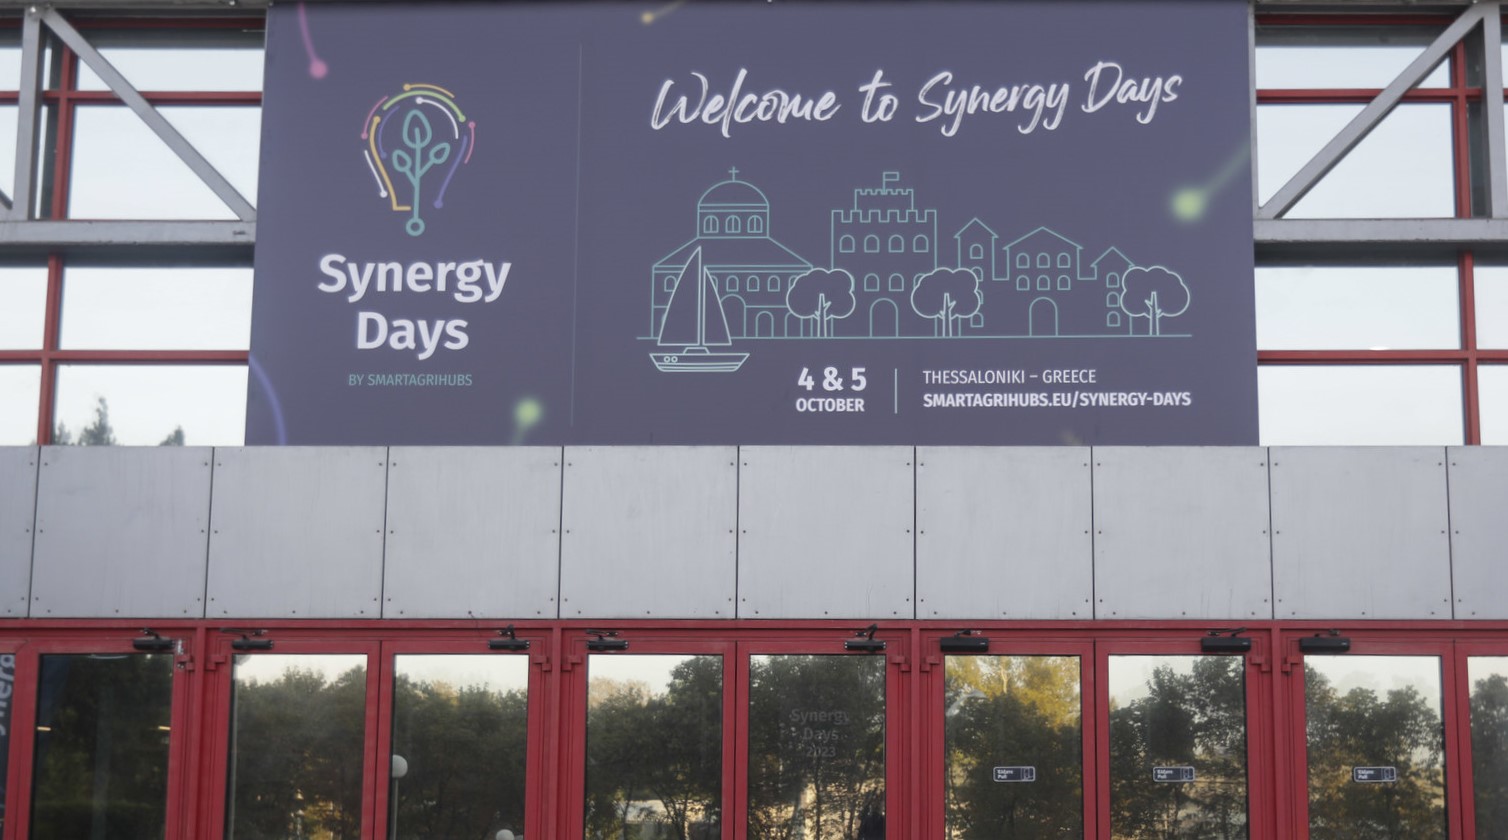 Entrance of the Synergy Days venue